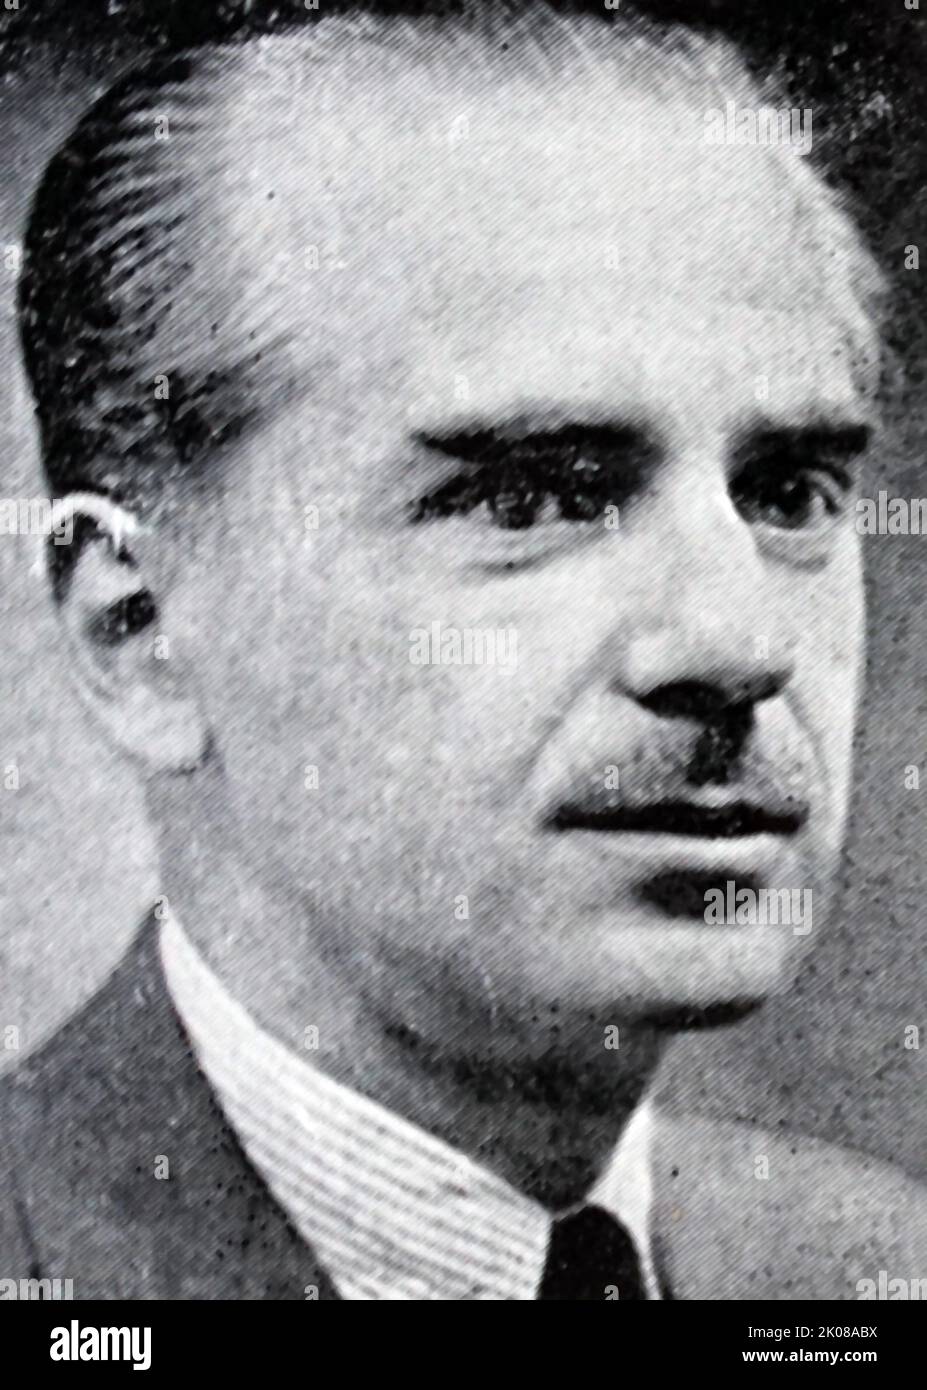 Ramon Serrano Suner (12 September 1901 - 1 September 2003), was a Spanish politician during the first stages of the Francoist dictatorship, between 1938 and 1942, when he held the posts of President of the FET y de las JONS caucus (1936), and then Interior Minister and Foreign Affairs Minister Stock Photo